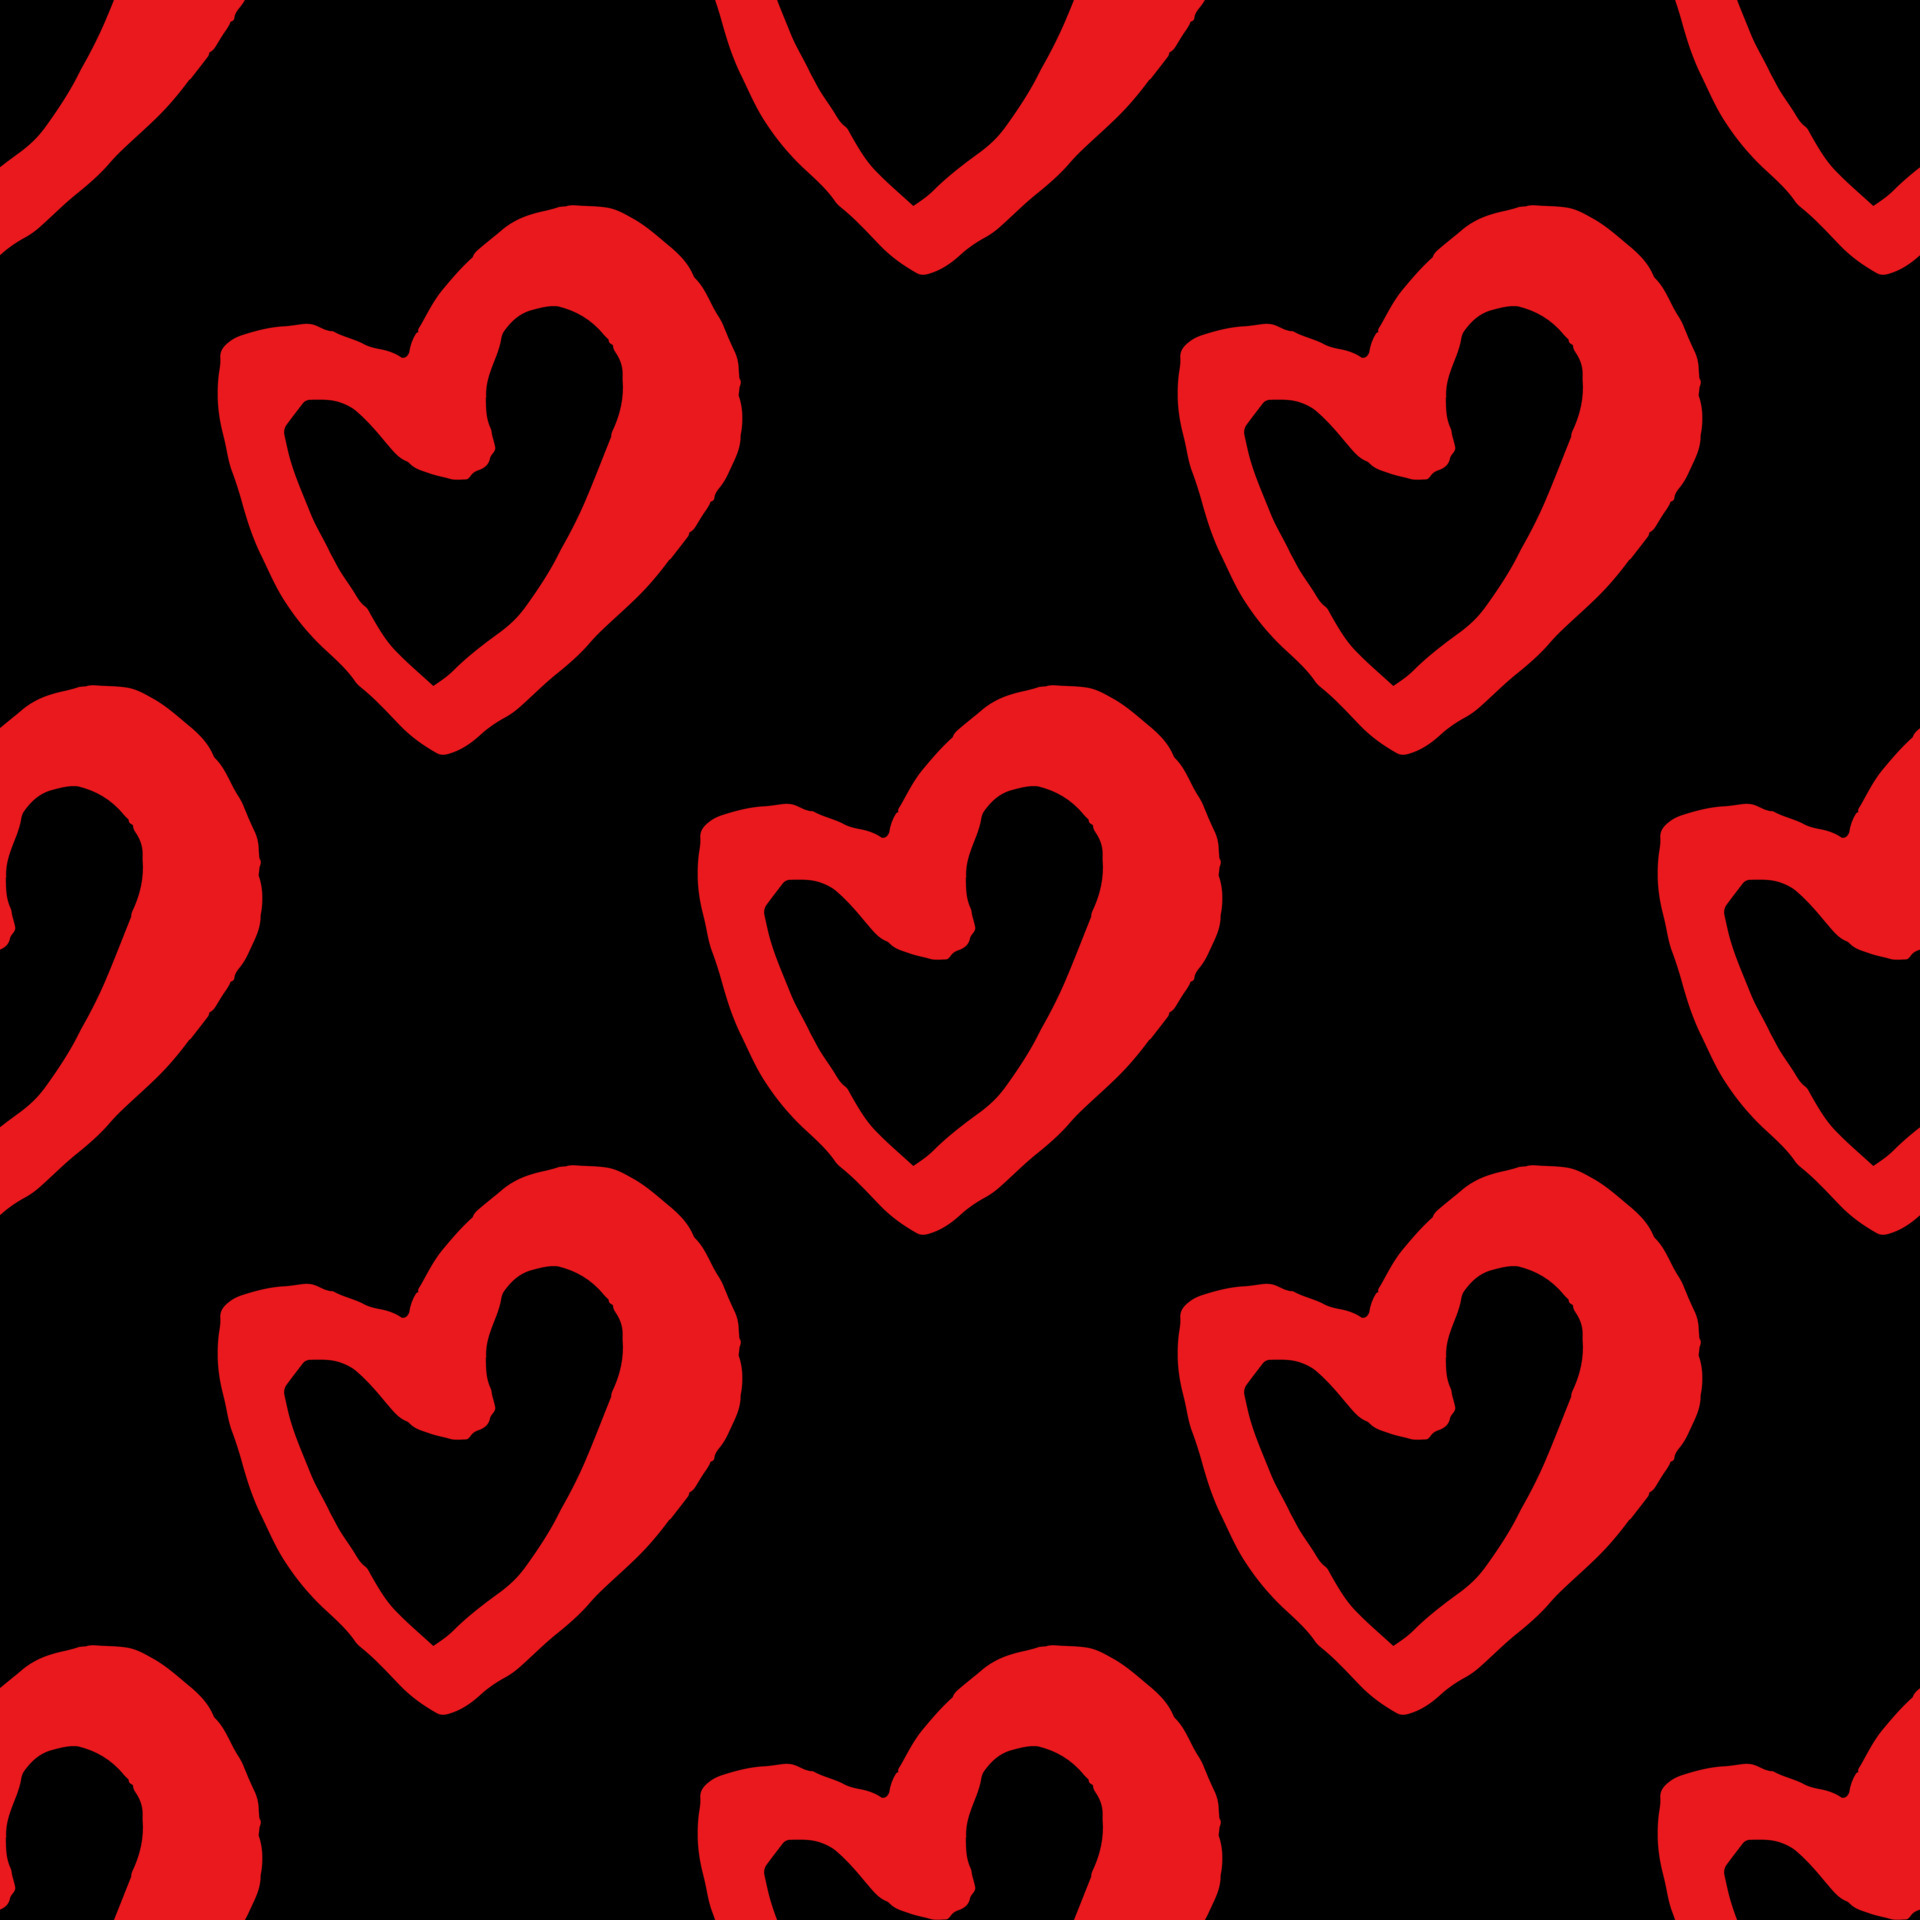 Background photo Love Heart Digital Art  Free TOP images